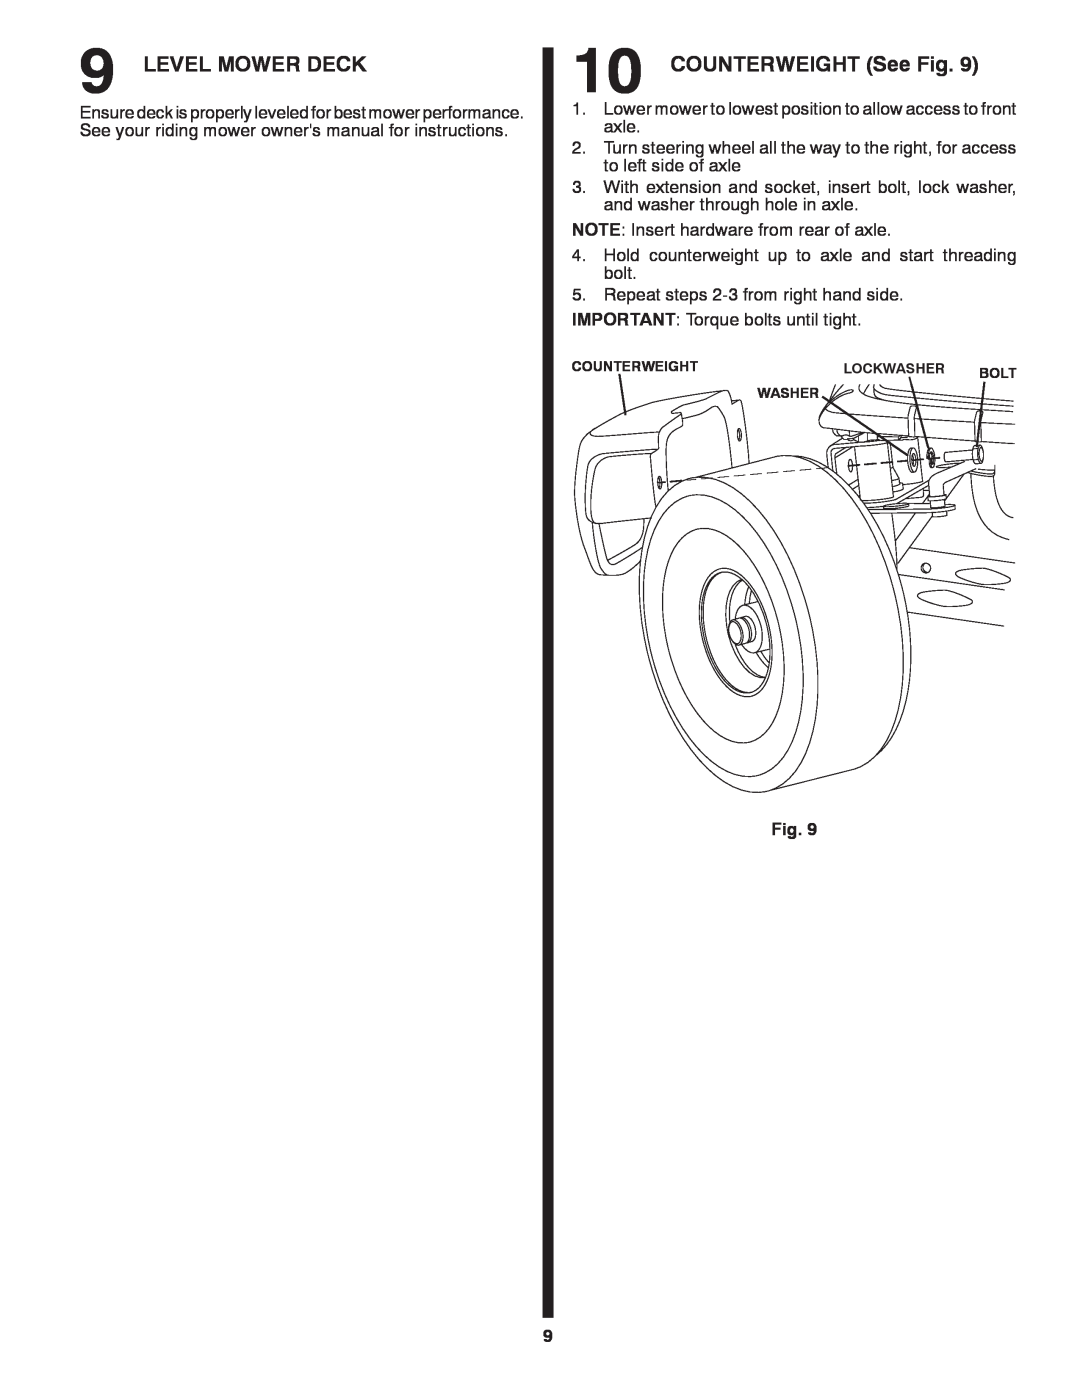 Weed Eater G26LRV, 960 73 00-27, 532 43 46-60 owner manual Level Mower Deck, COUNTERWEIGHT See Fig 